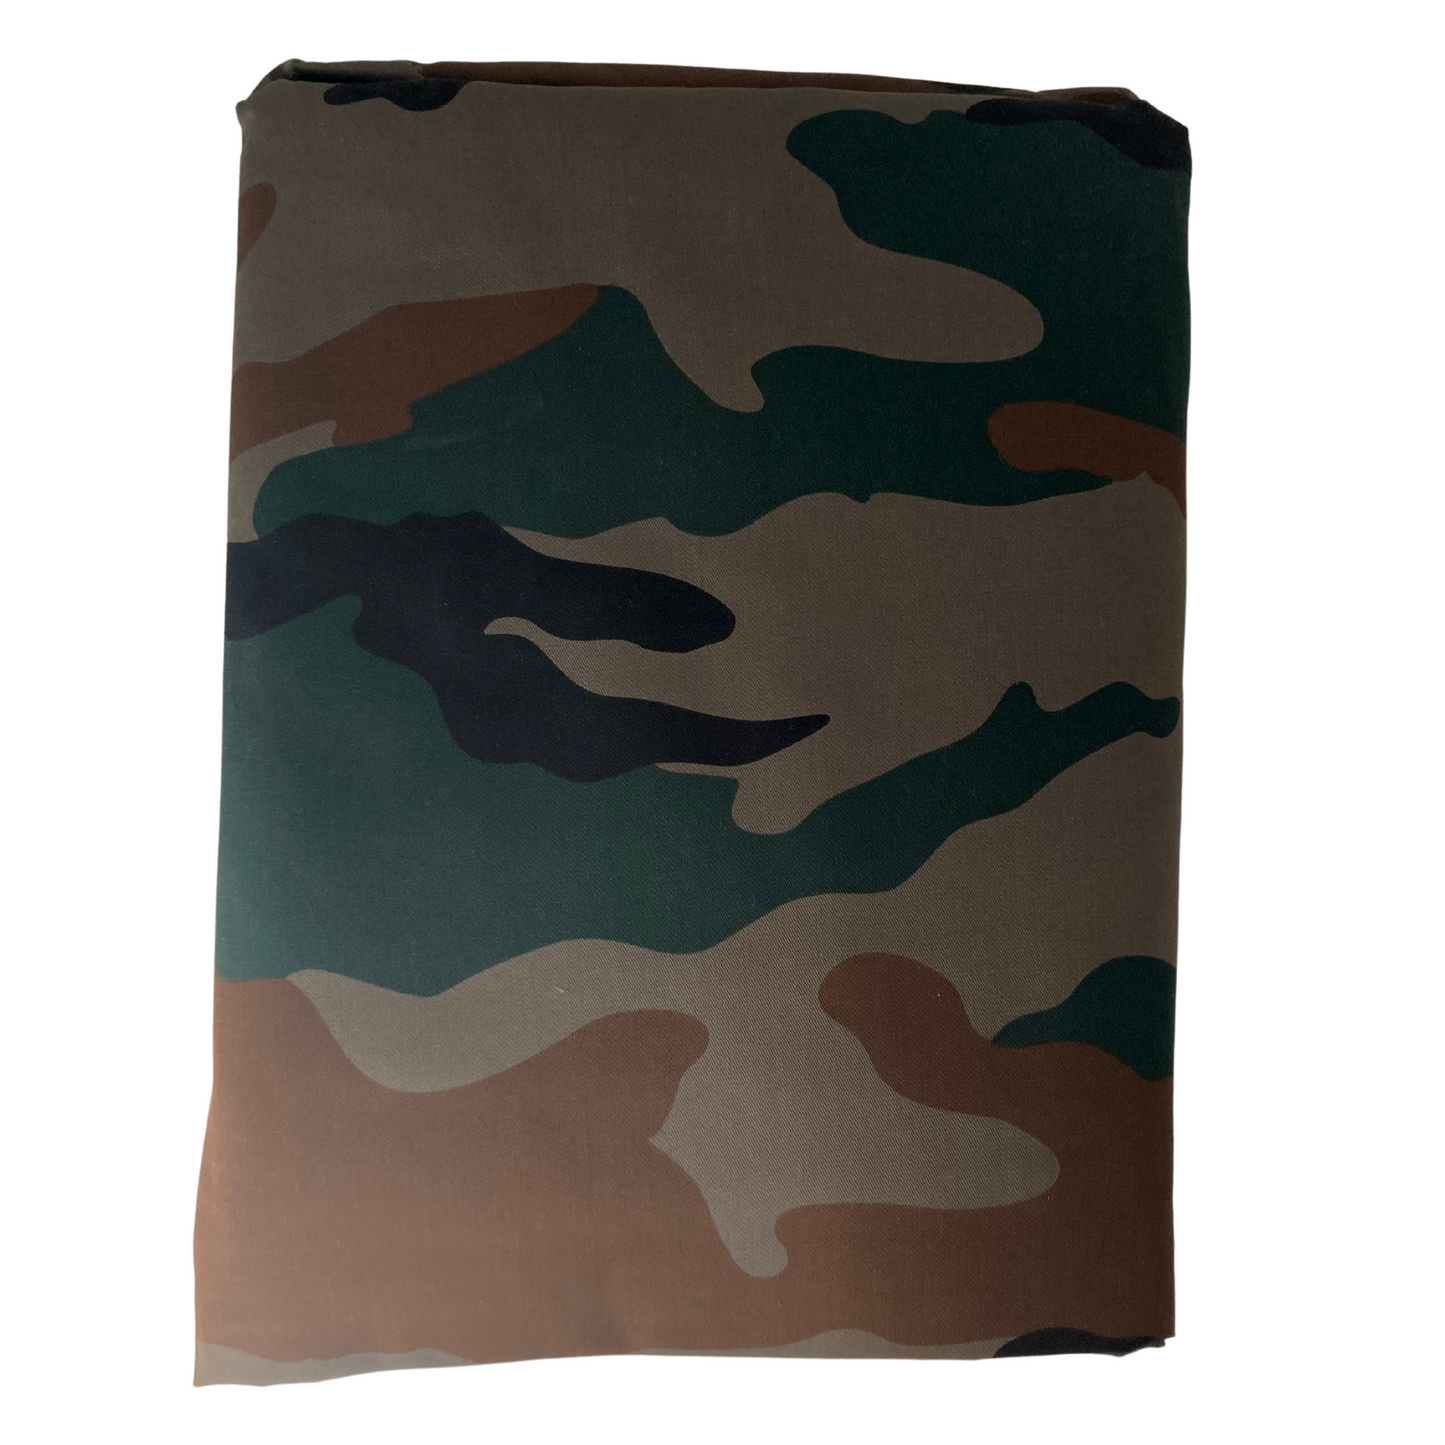 Fabric Camouflage - Indian Army-Green Man Mills